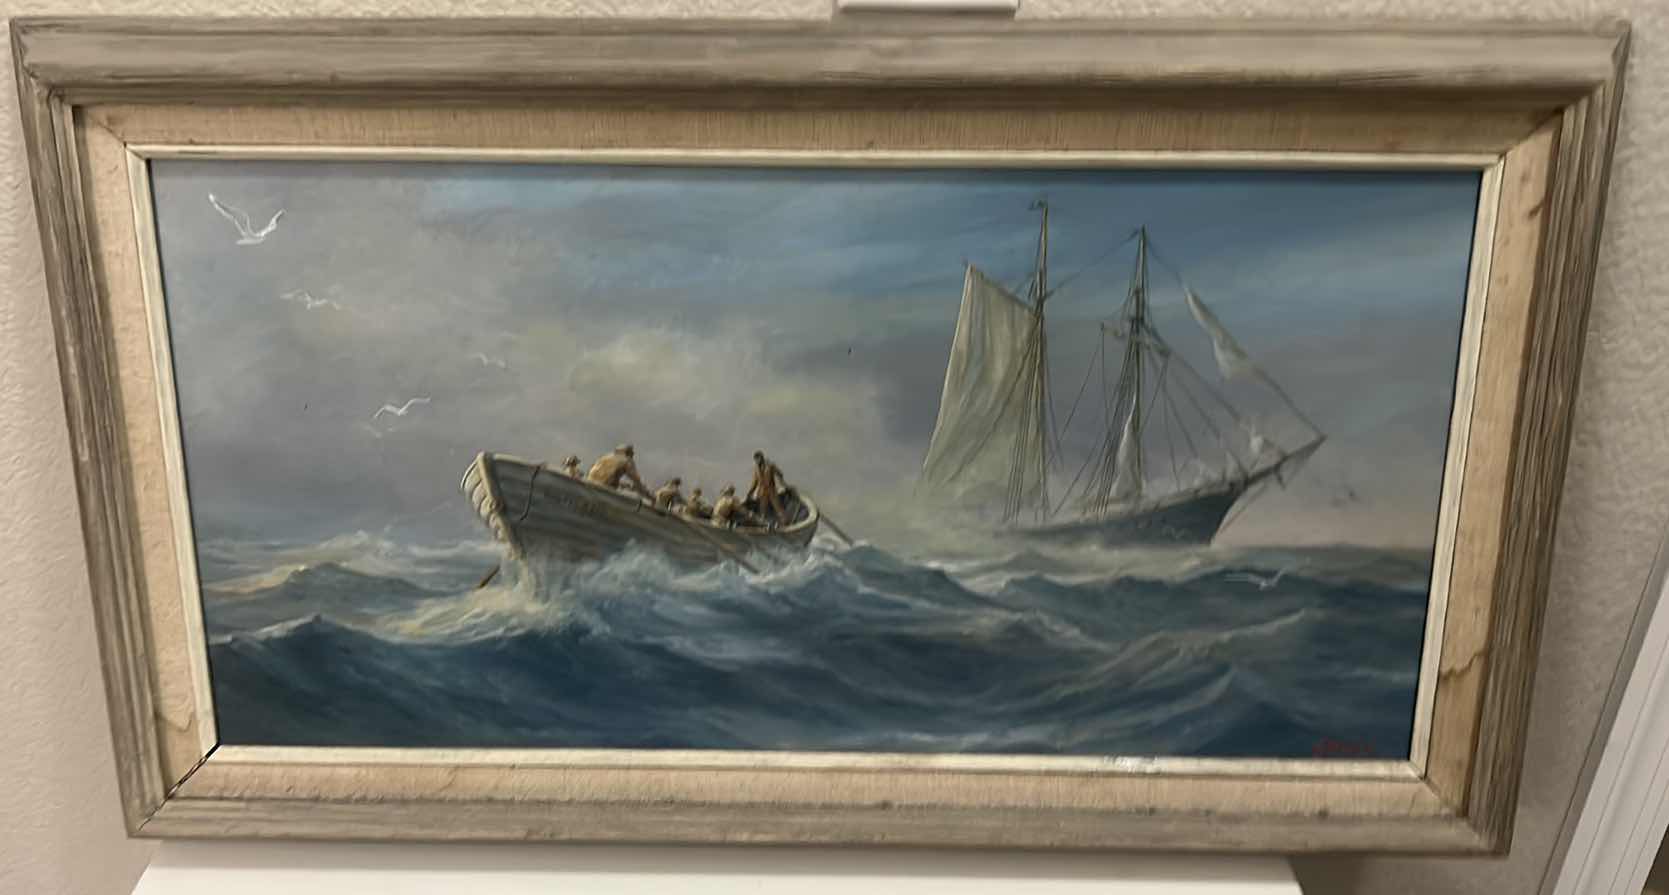 Photo 1 of FRAMED OIL ON CANVAS “ROWBOAT” SIGNED ARTWORK 28” x 16”